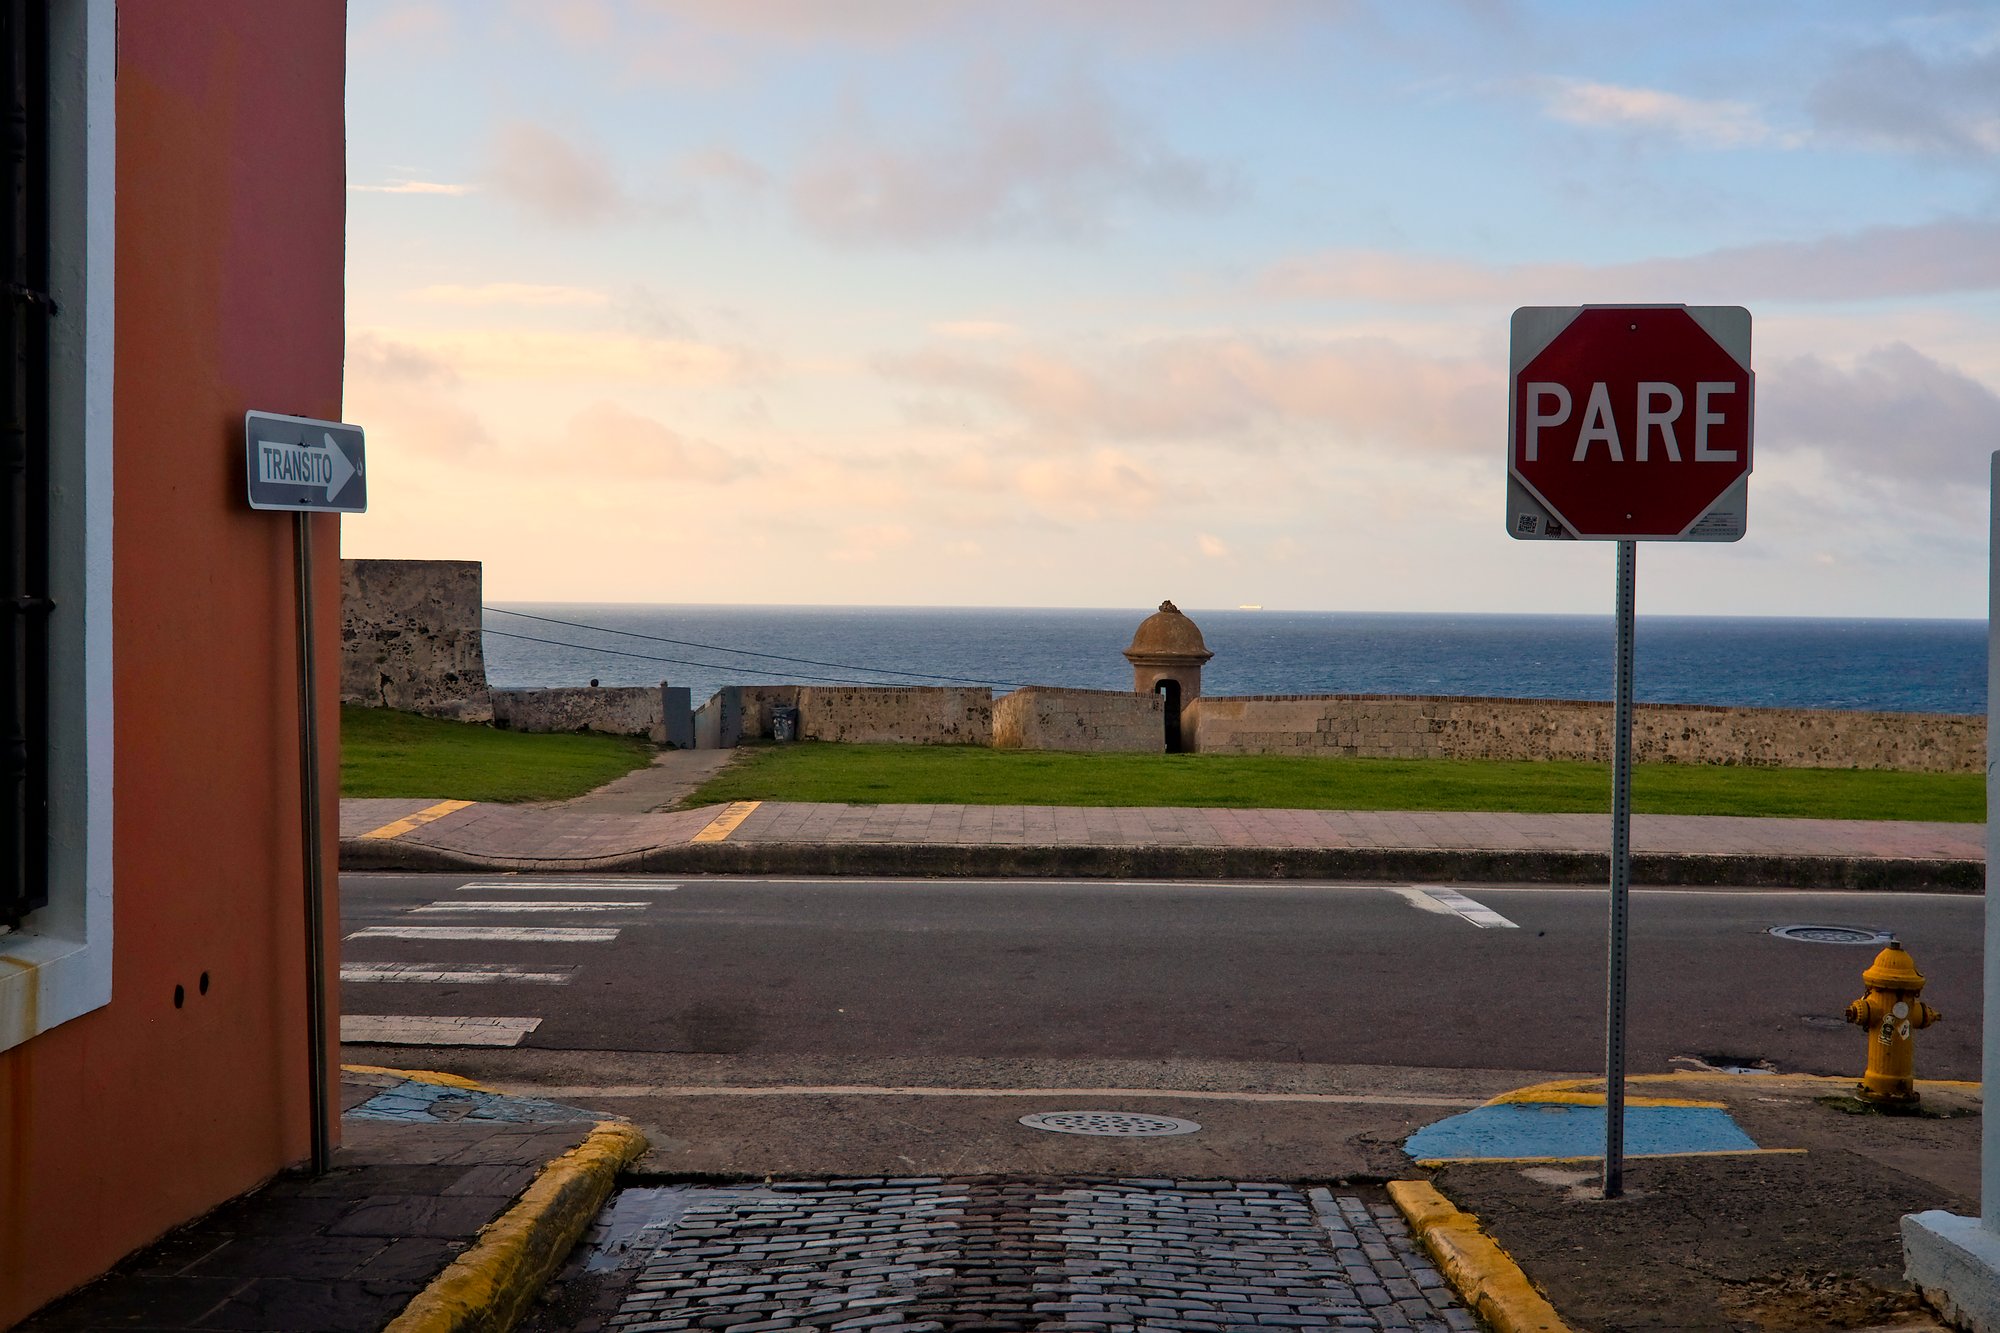 A one-way and stop sign in San Juan